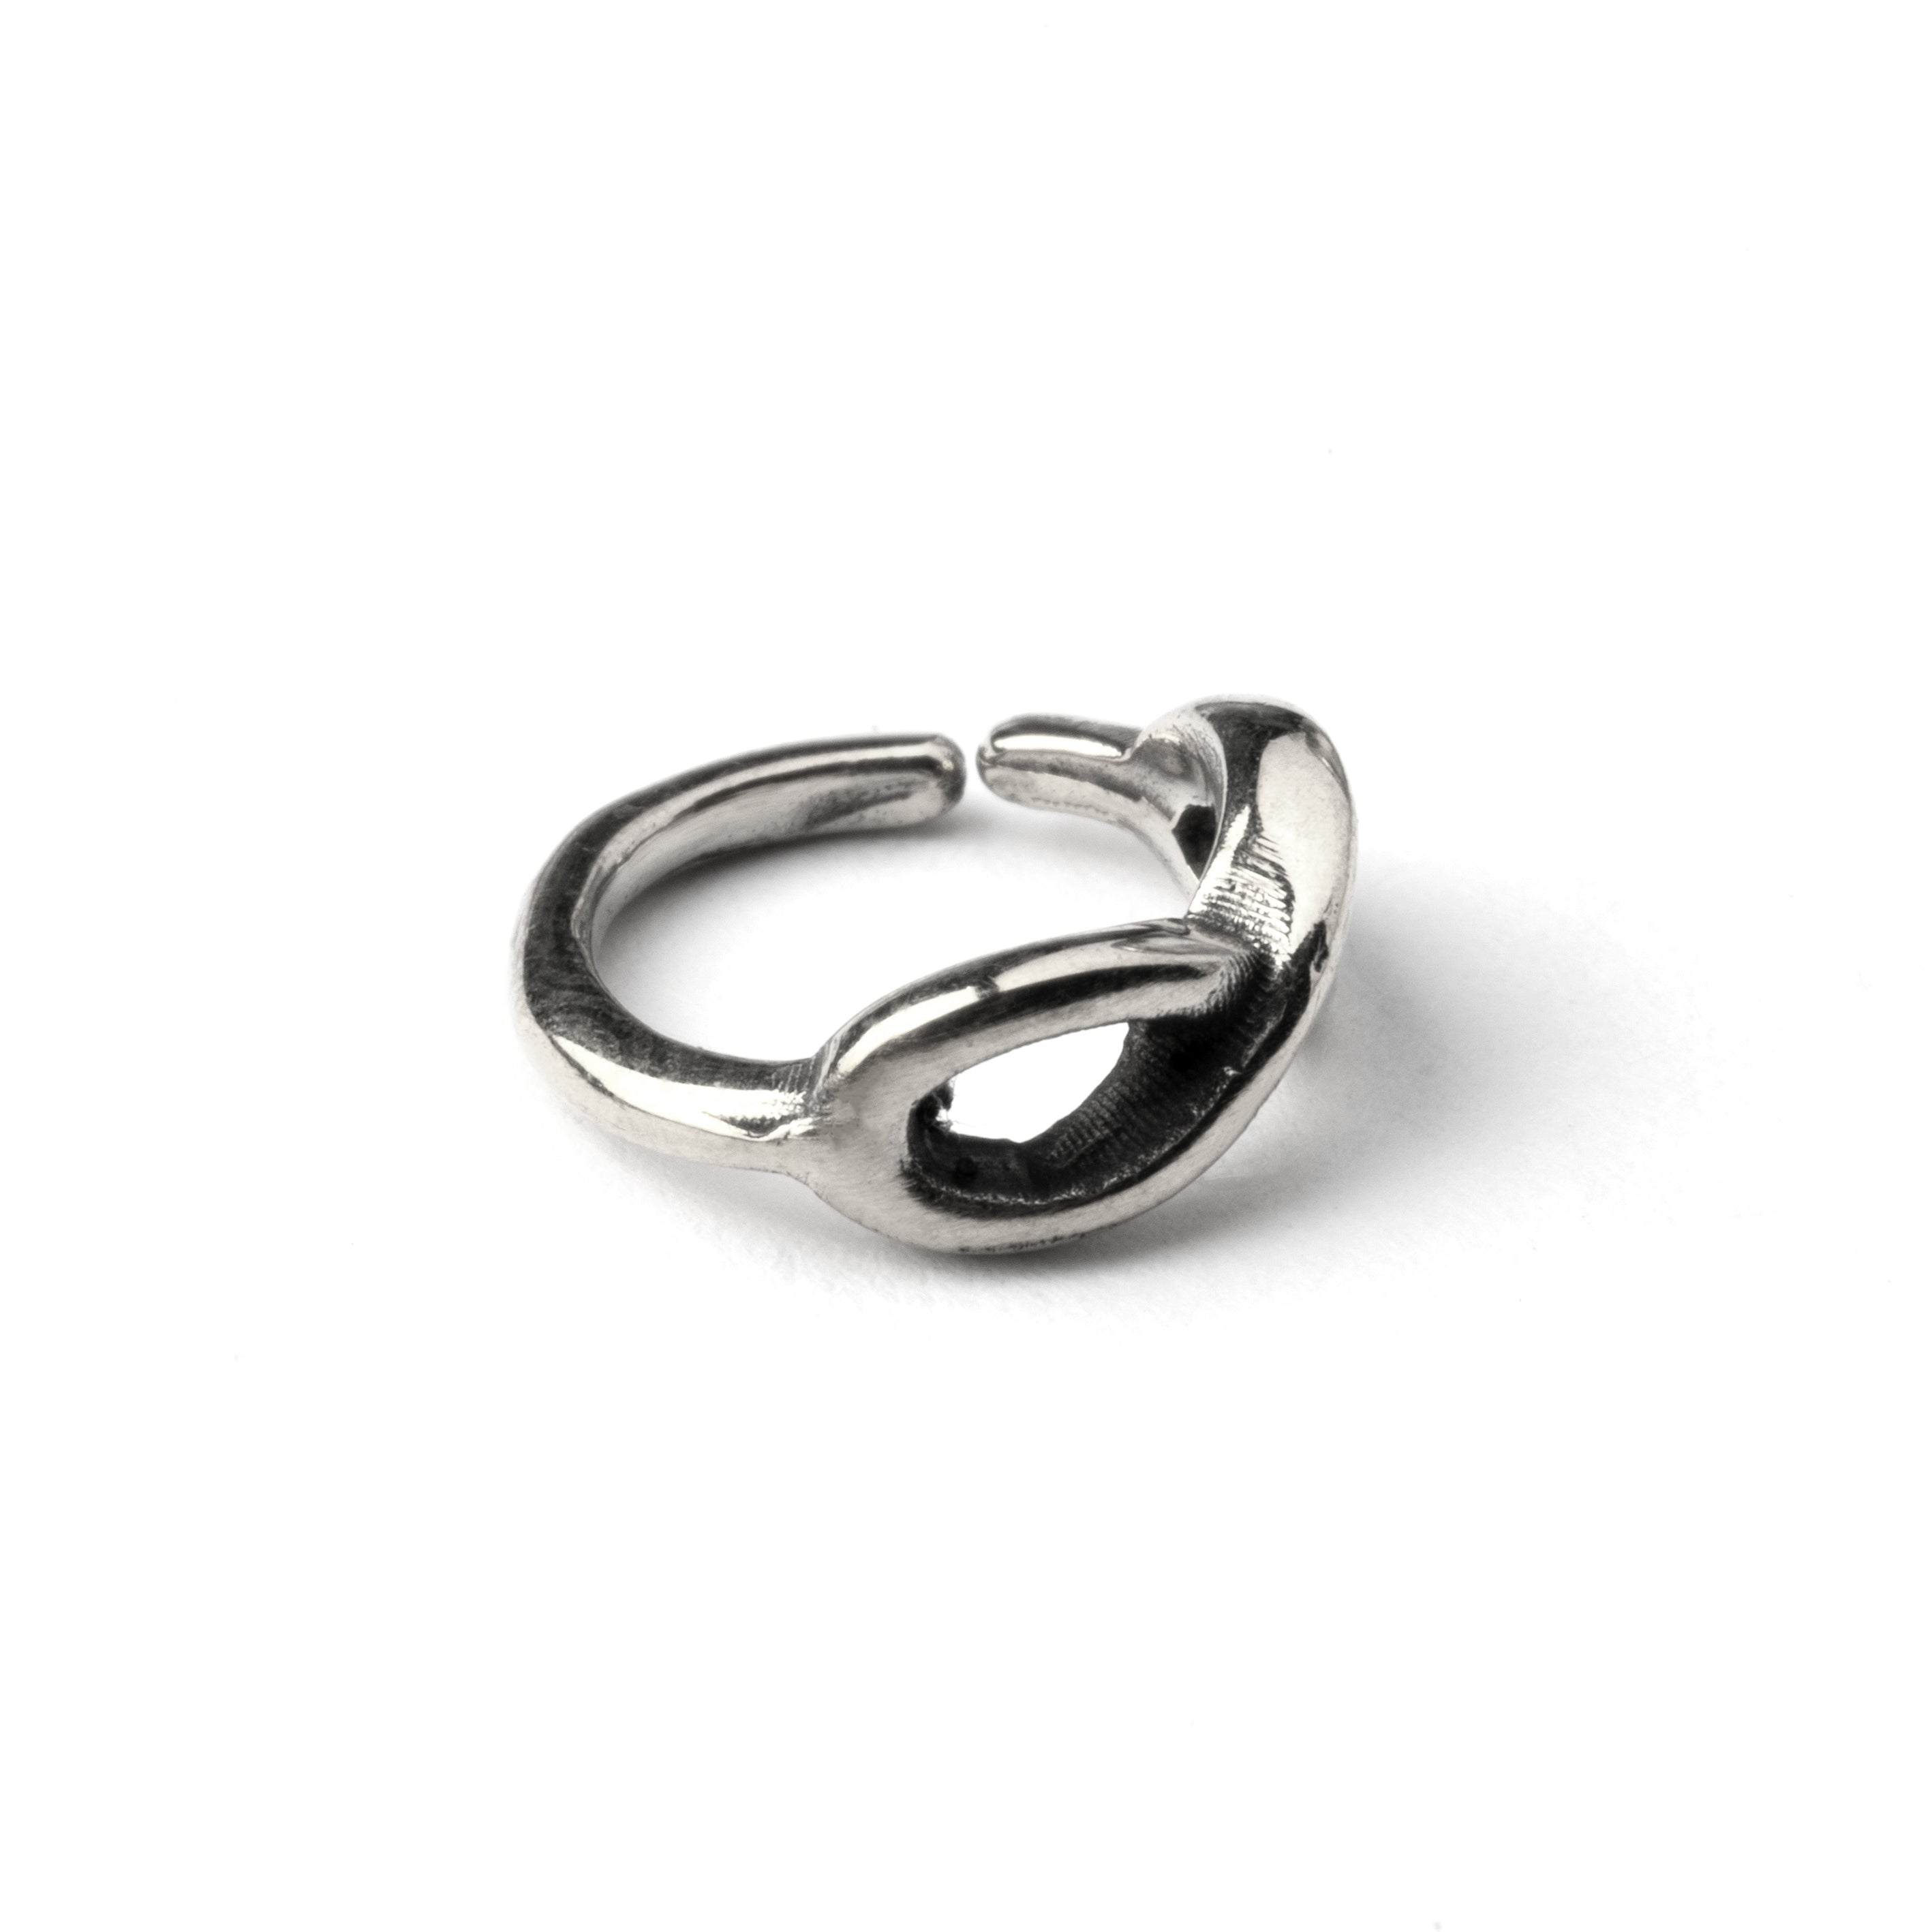 Silver Infinity piercing nose ring left side view